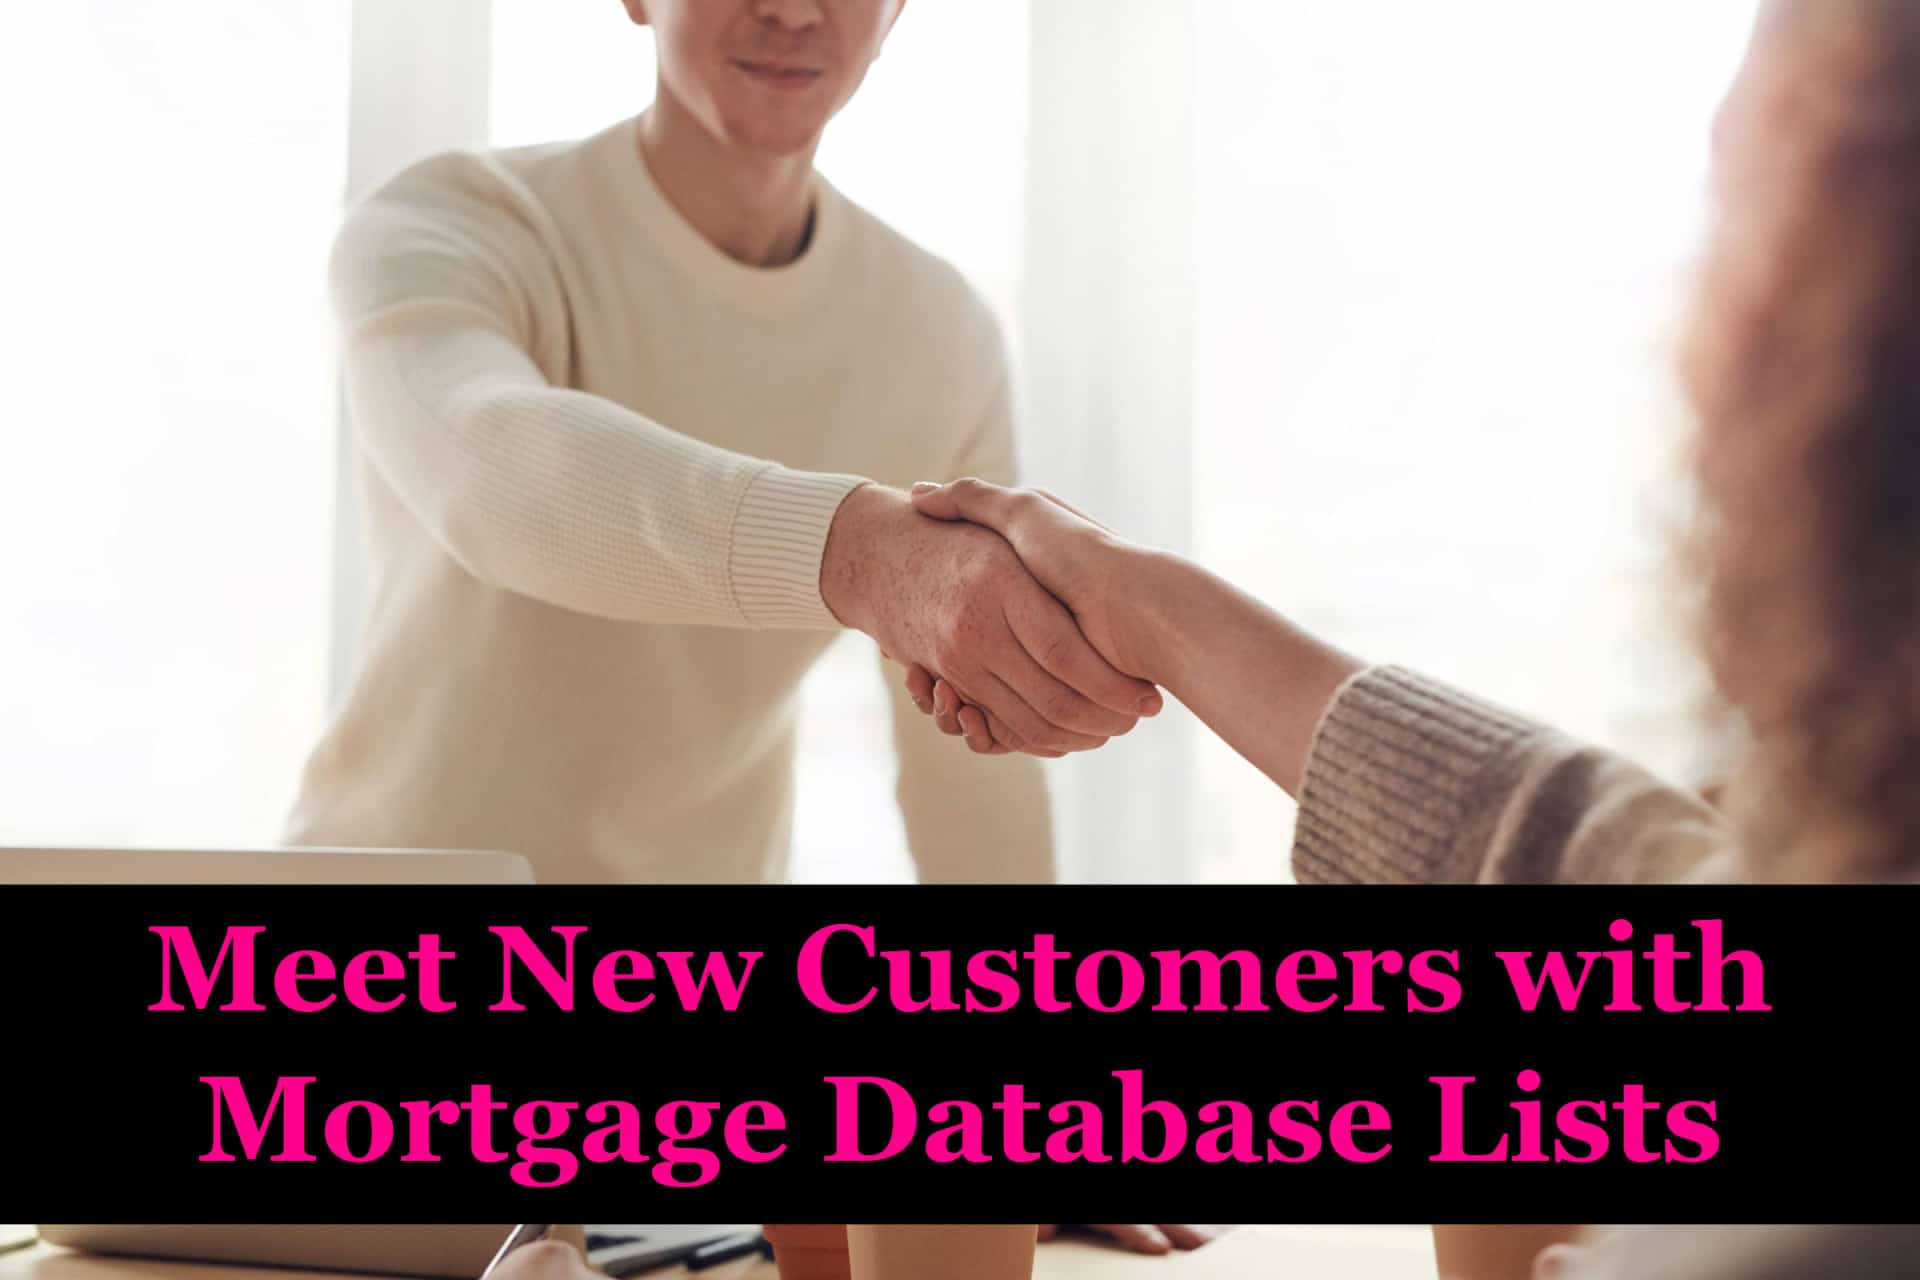 A business owner who met a new customer using mortgage database lists